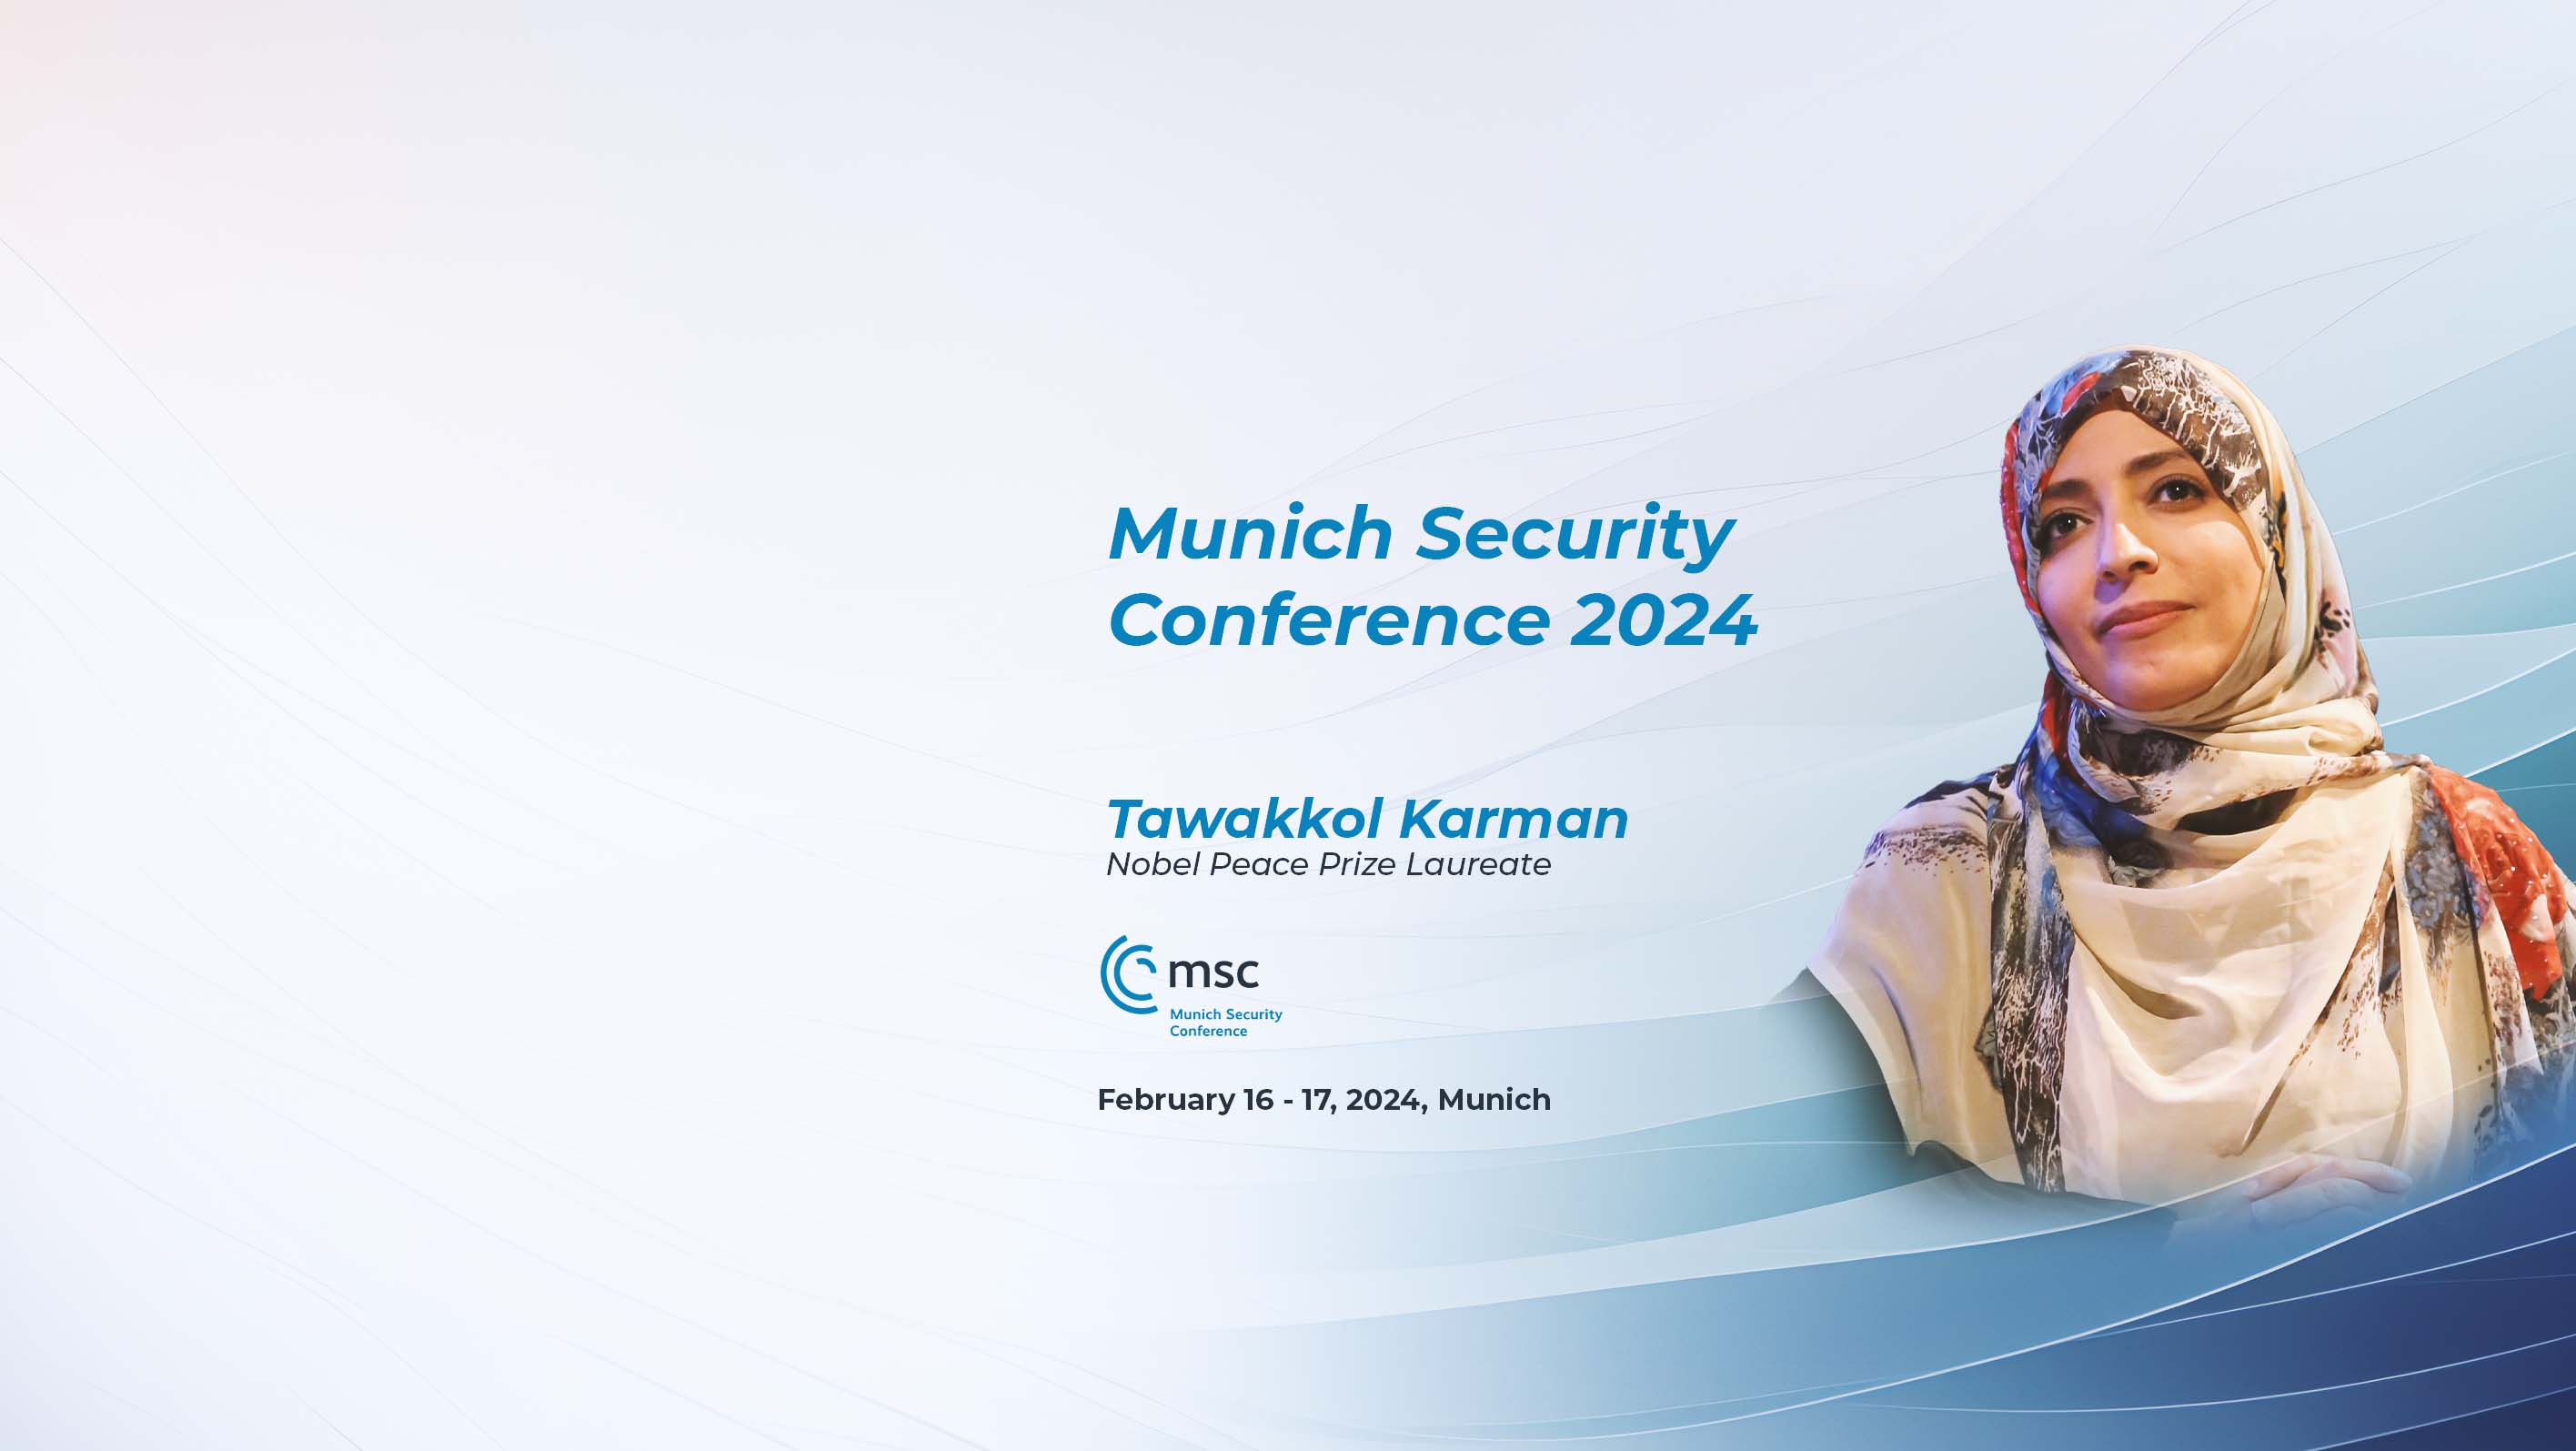 Tawakkol Karman to address global security issues at 2024 Munich Conference